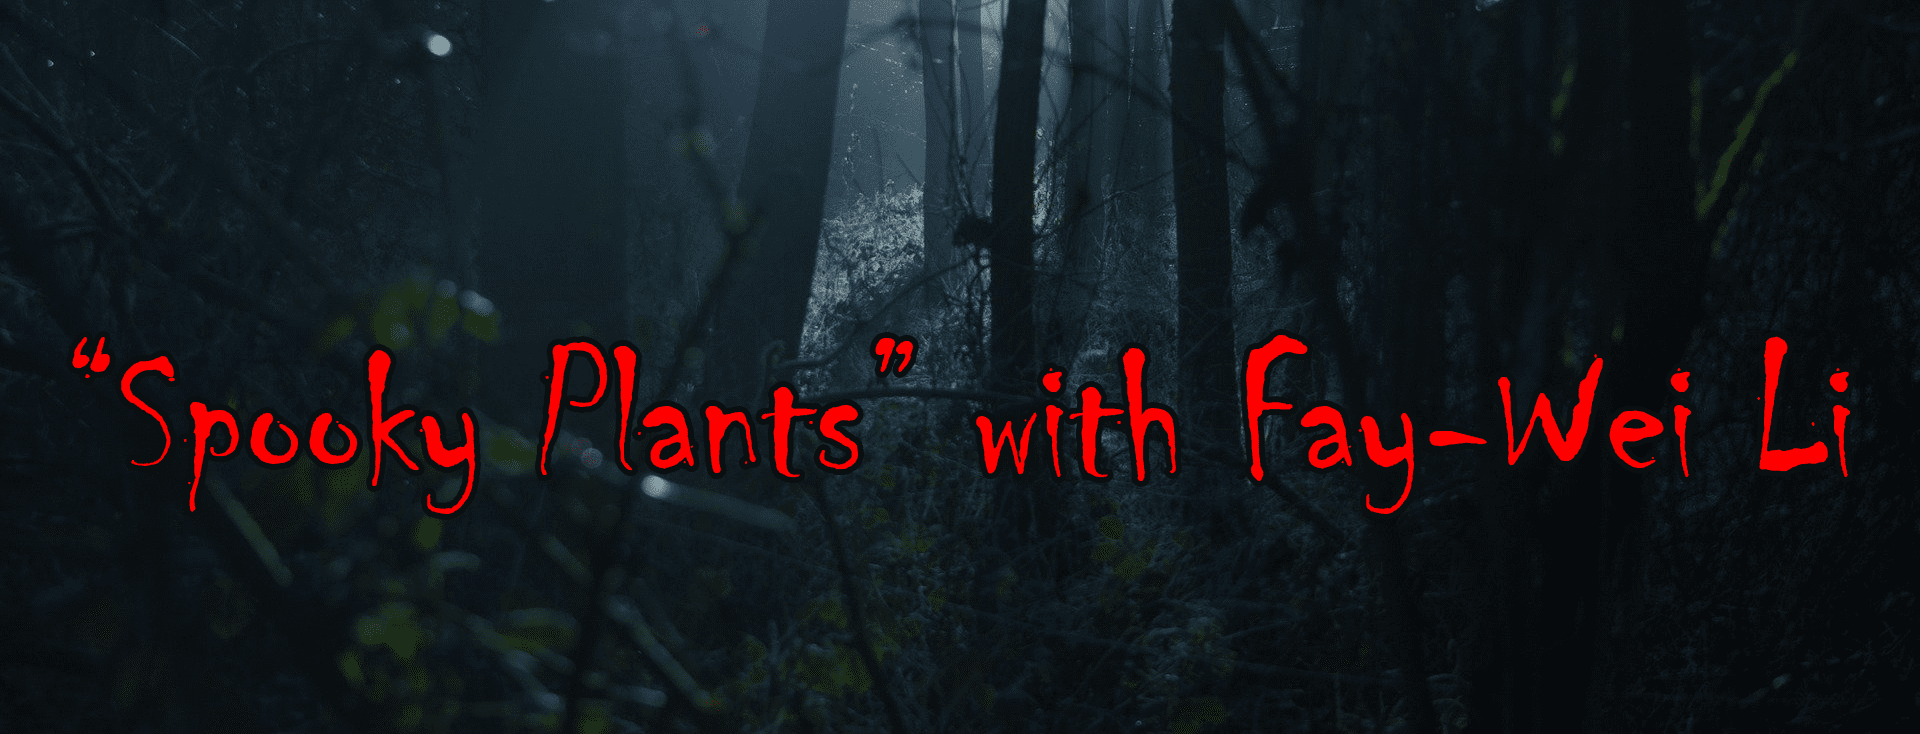 A dark forest with the text Spooky Plants